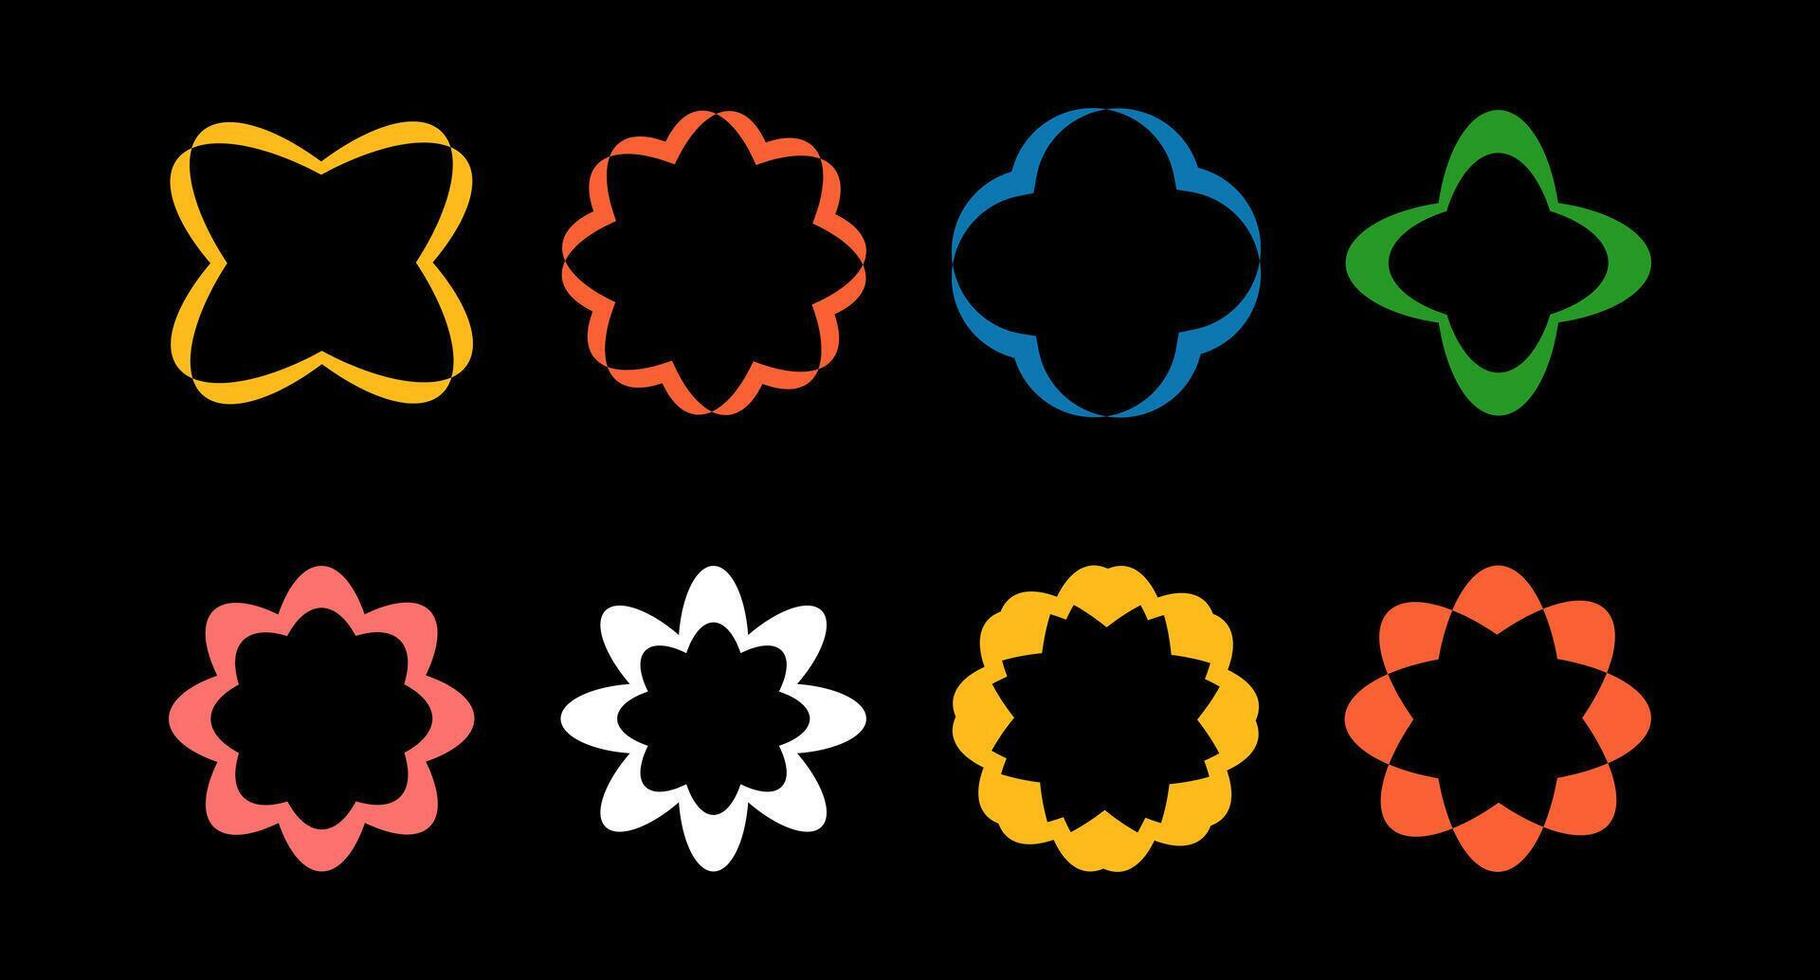 Set of colored brutalist geometric shapes. Abstract minimalist figures, stars, flowers, circles. Graphic design elements. Isolated on black background.  Y2k  abstract minimalist flower set. vector